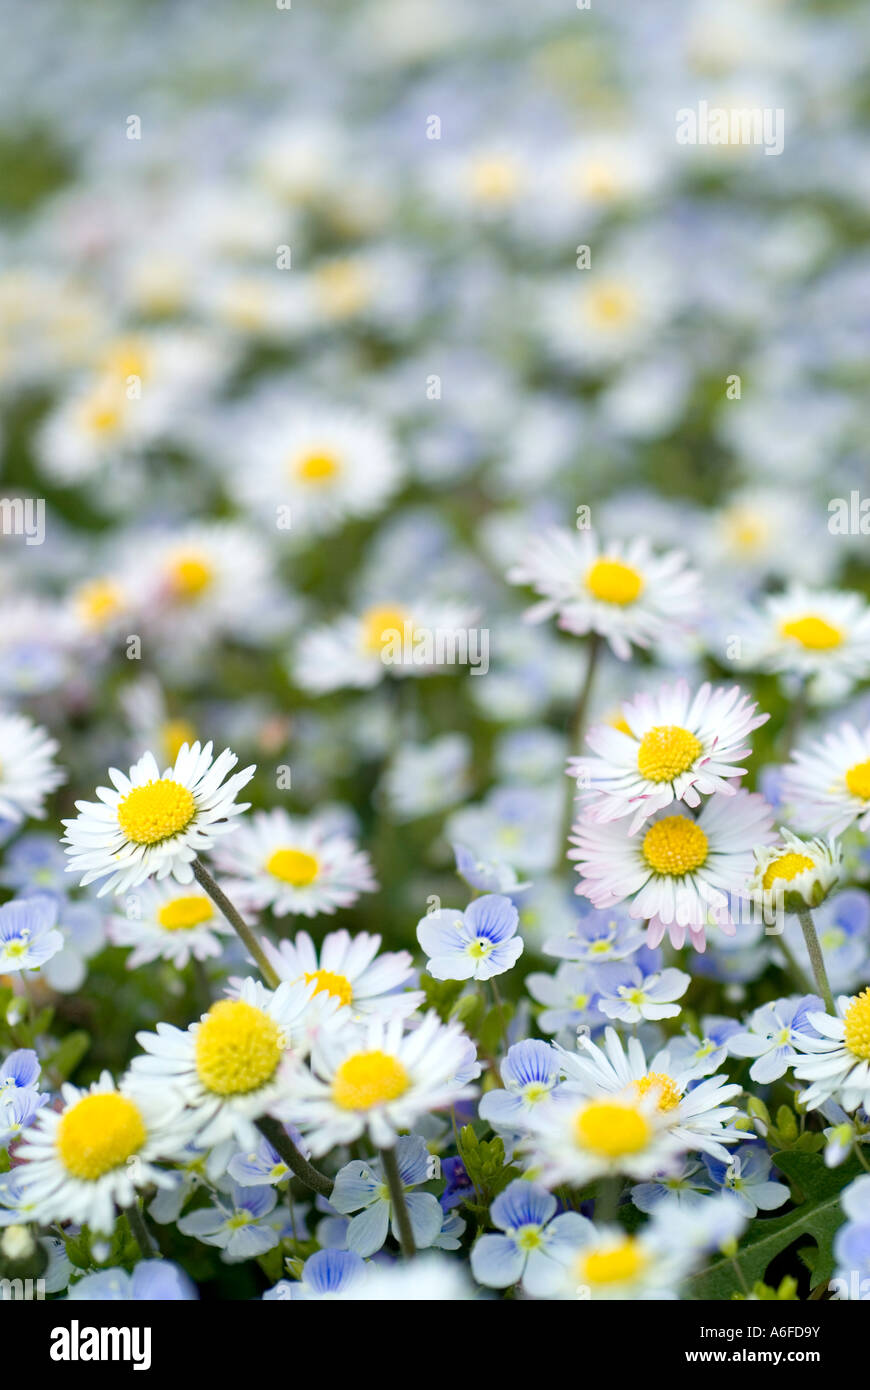 Close Up of Daisies Bellis Perennis standing together with Speedwell Veronica Persica Stock Photo